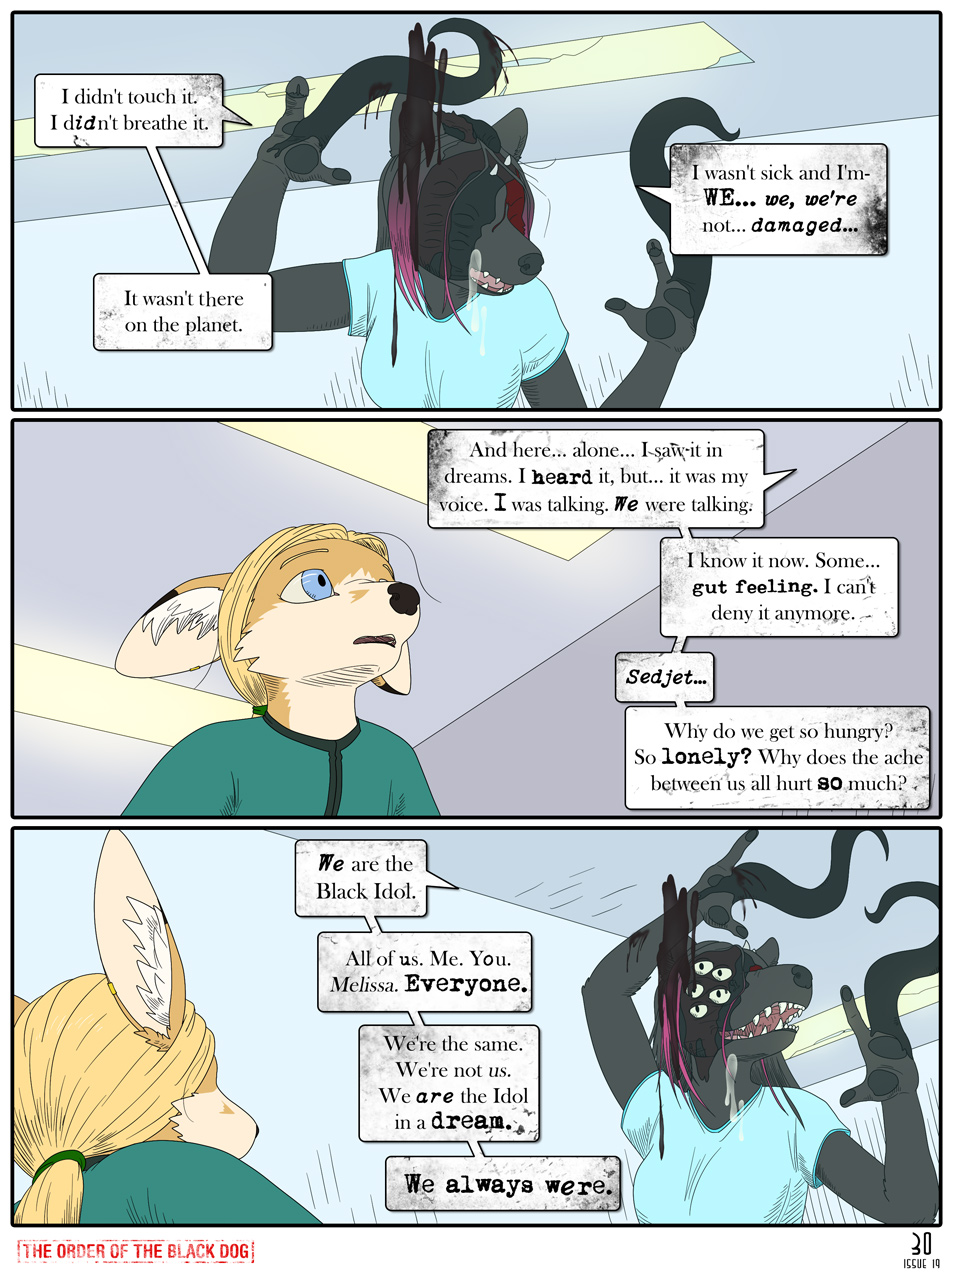 Issue 19, Page 30